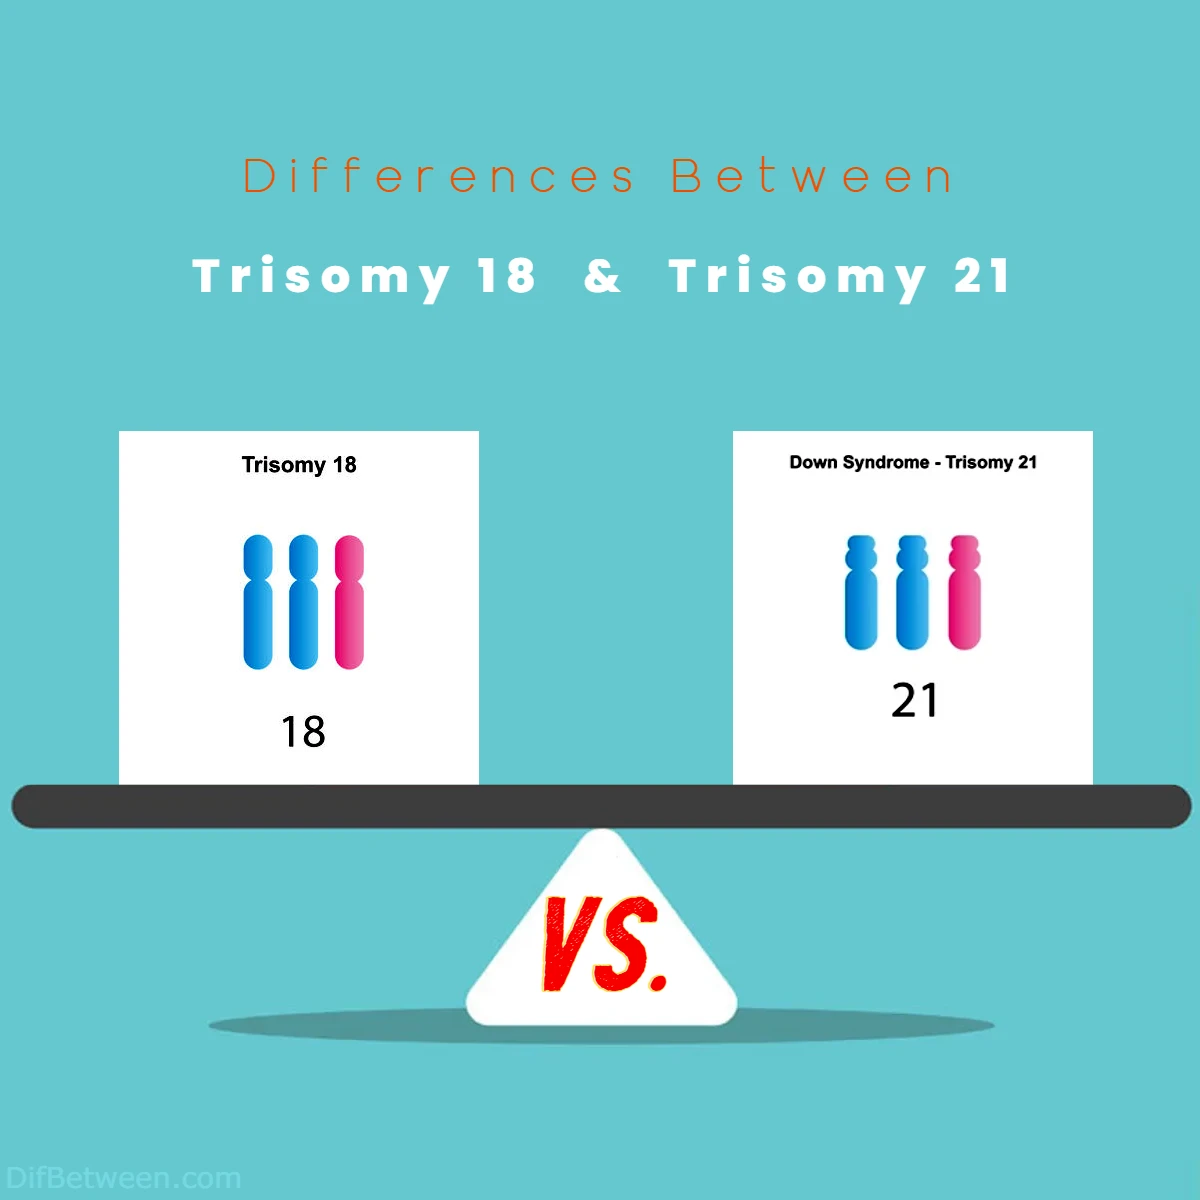 Differences Between Trisomy 18 vs 21